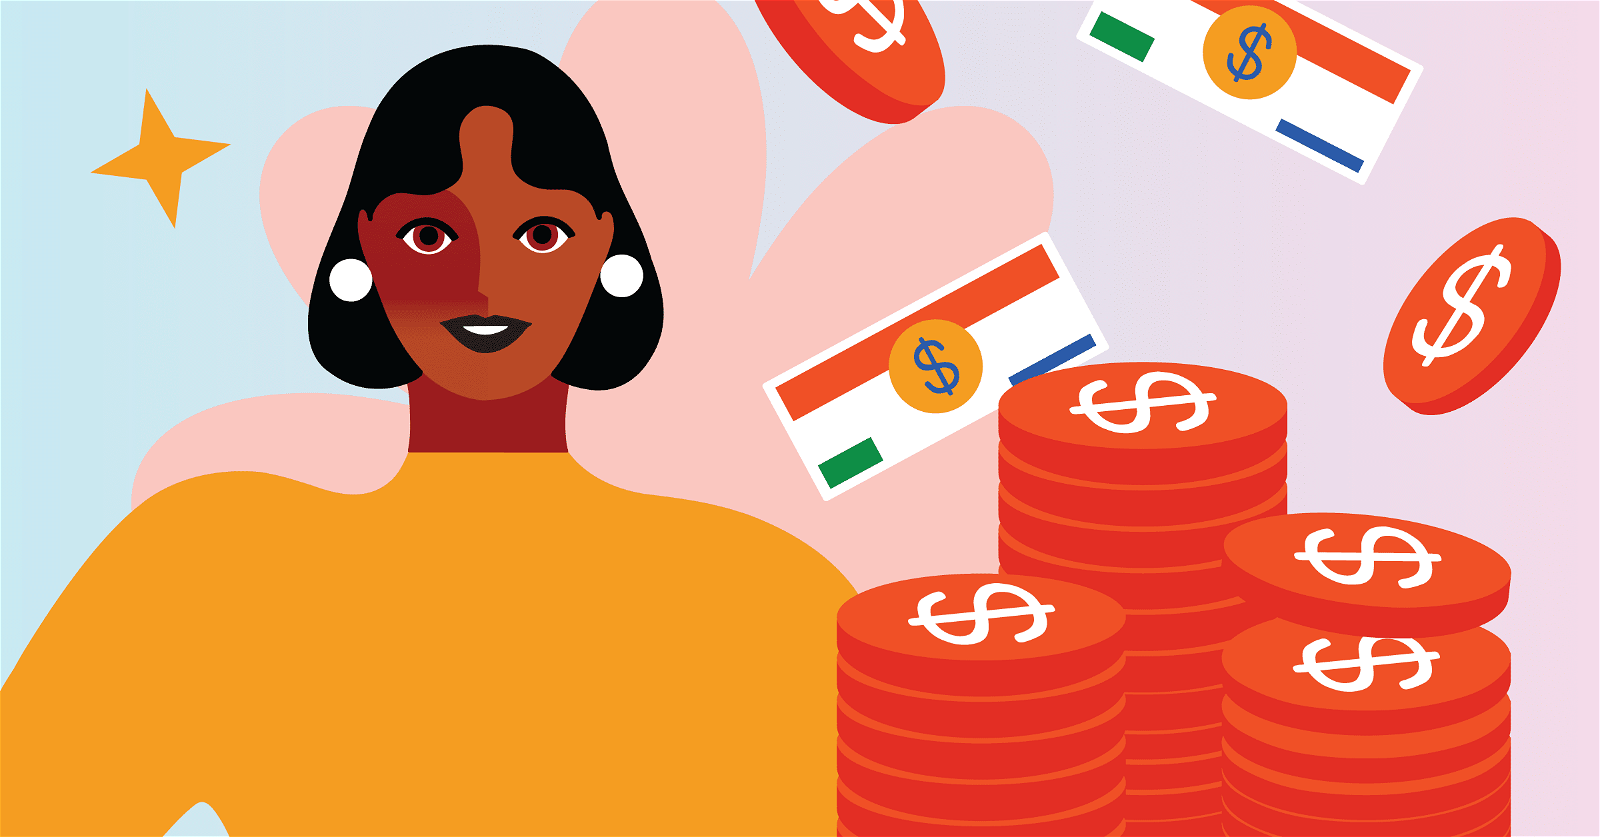 Illustration of a smiling woman with short black hair, wearing a yellow top and white earrings. Behind her, floating currency bills and coins with dollar signs in red and orange hues depict financial wellness. A gold star is near her head, against a light blue and pink background for contrast.